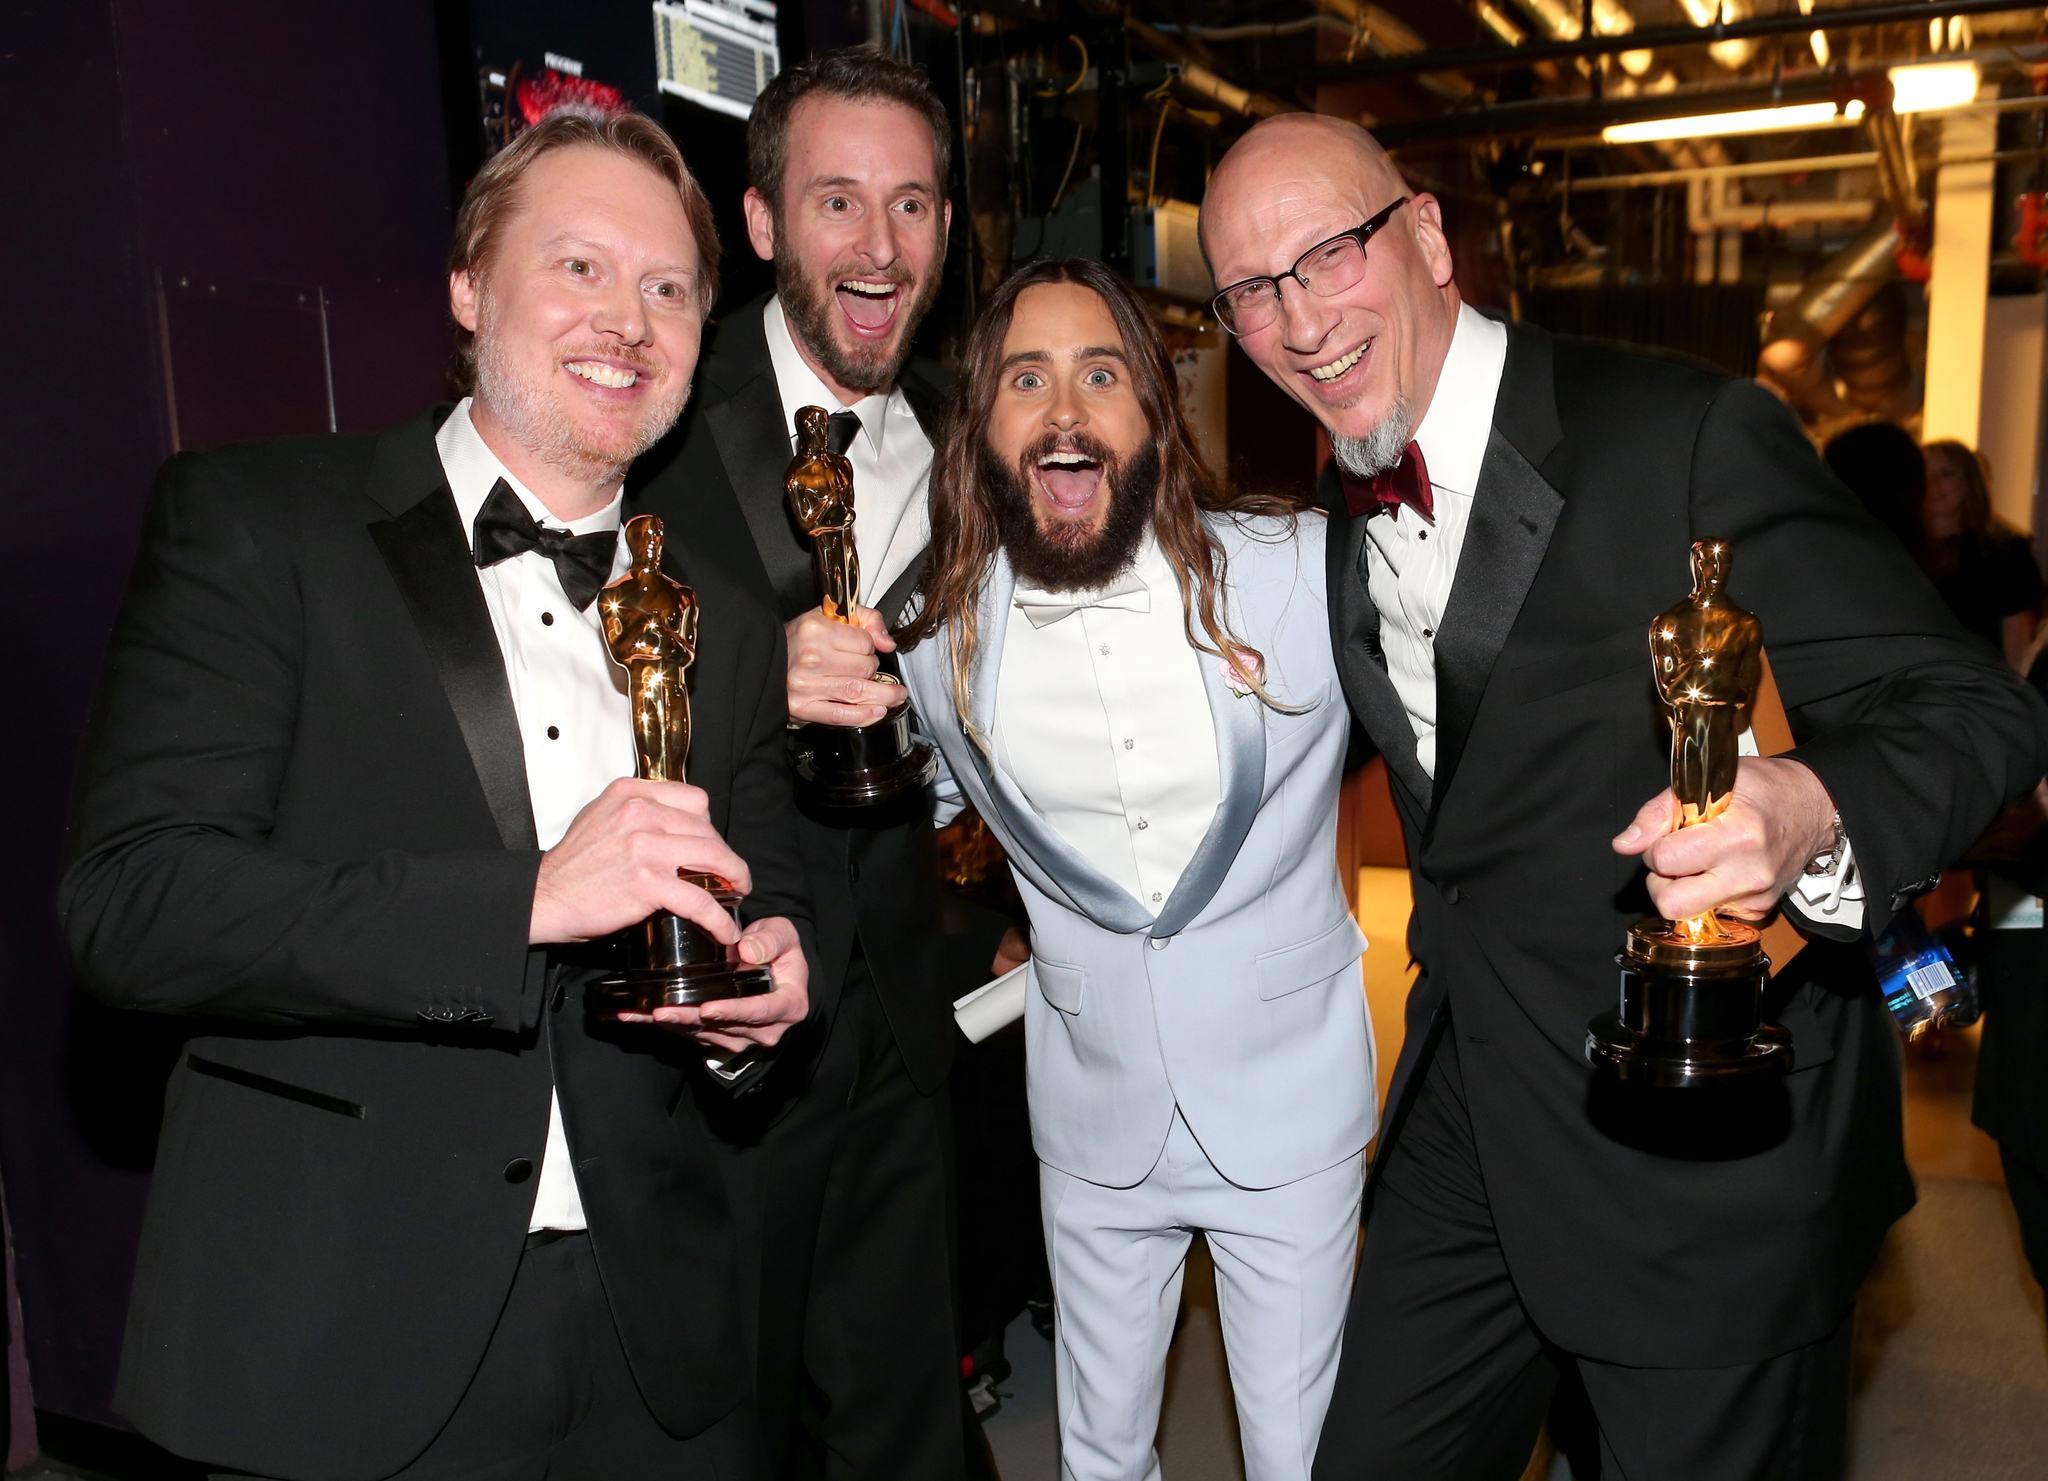 Jared Leto, Roy Conli, Chris Williams and Don Hall at event of The Oscars (2015)